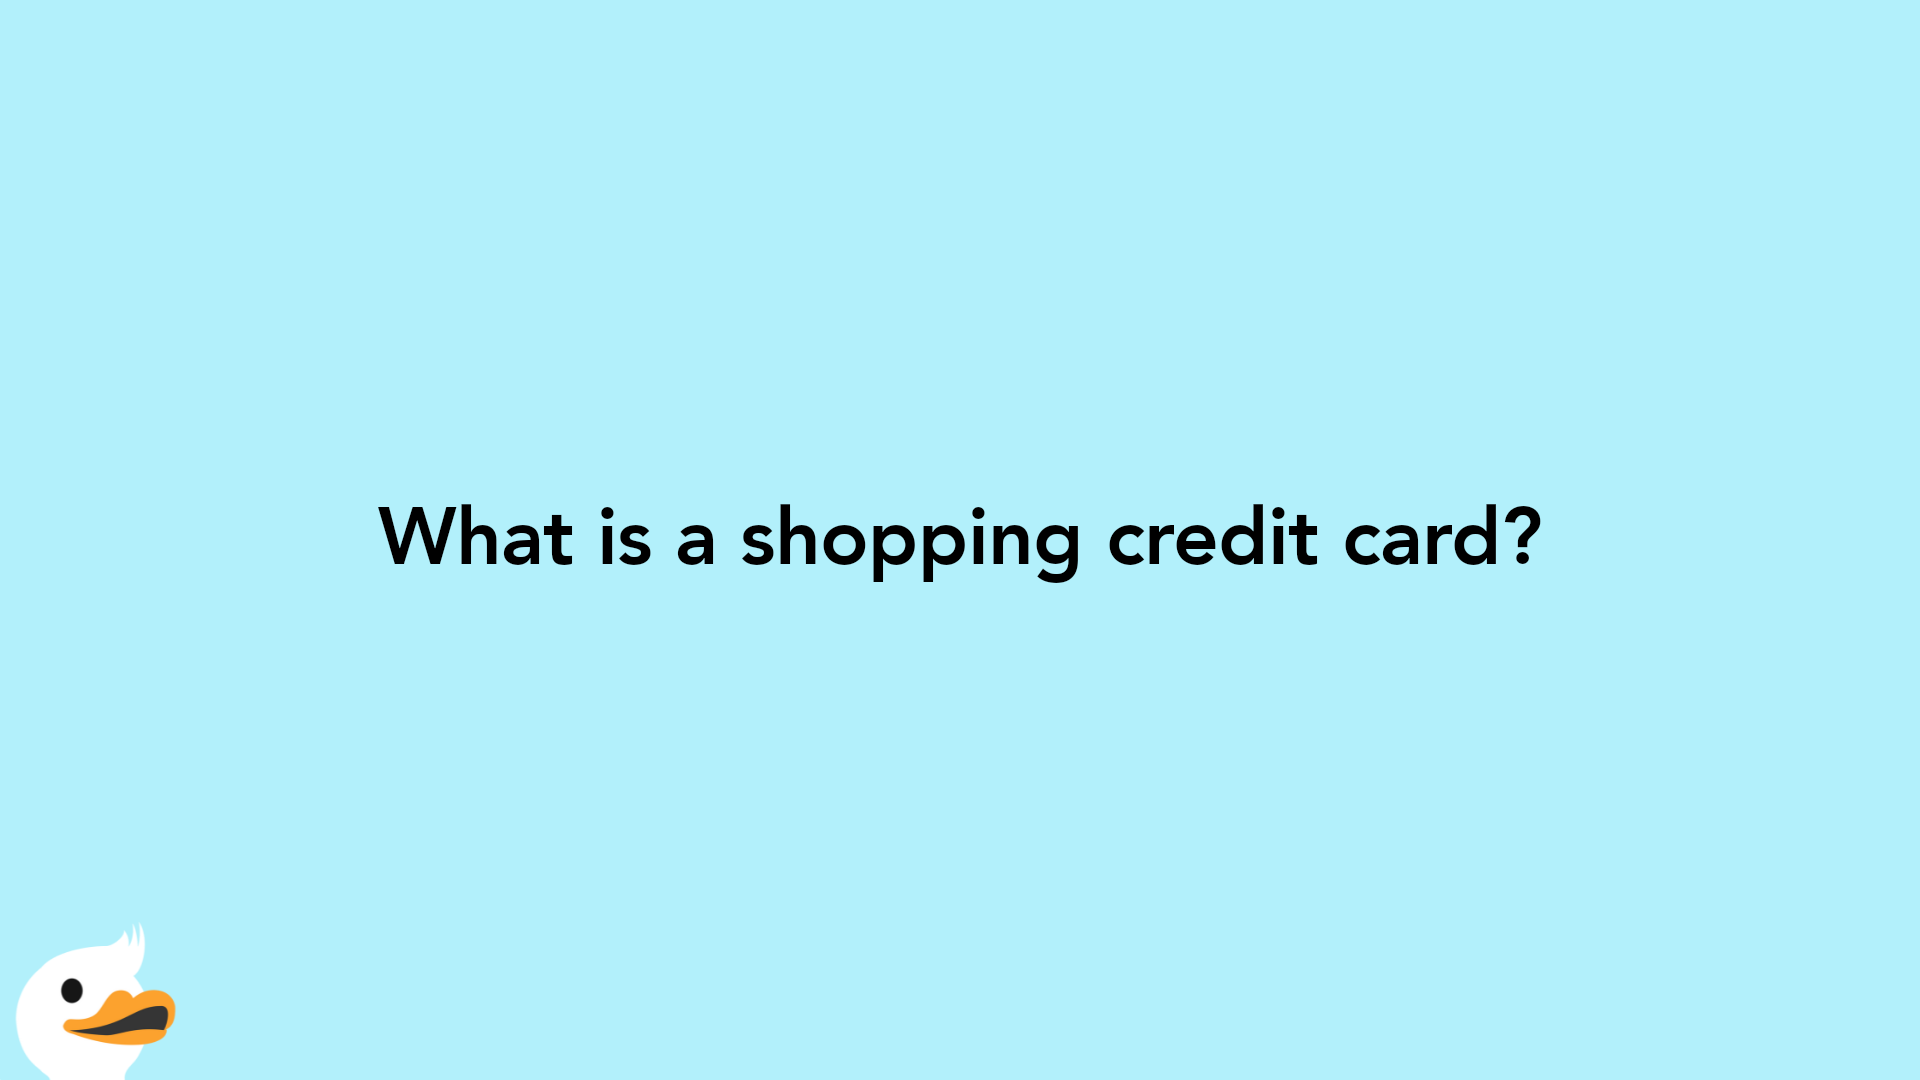 What is a shopping credit card?